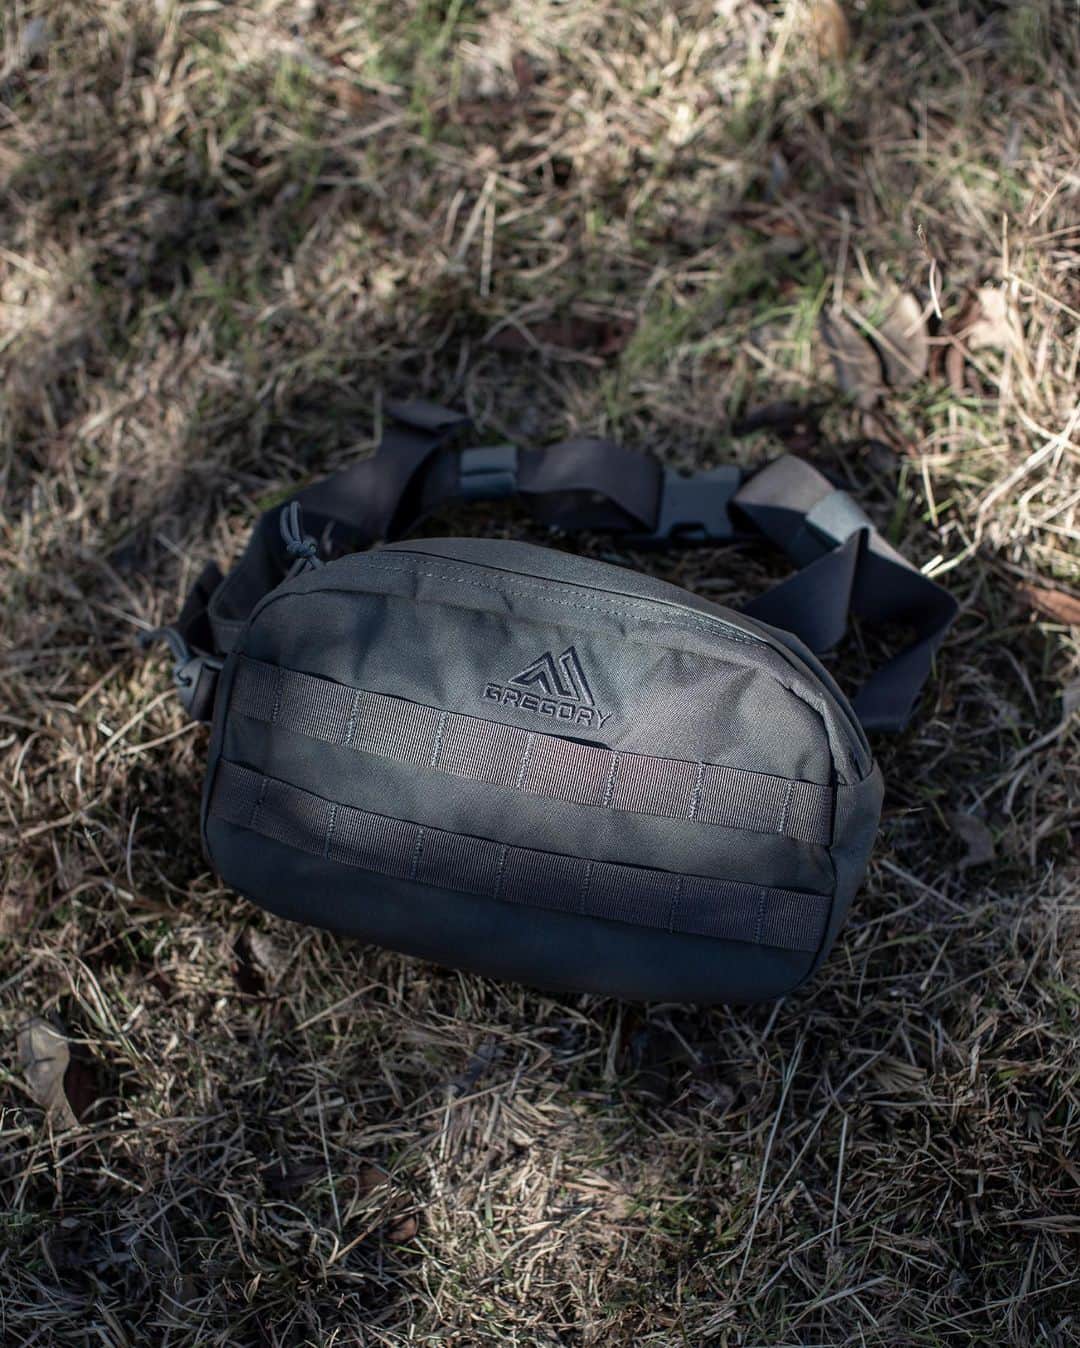 ビームスさんのインスタグラム写真 - (ビームスInstagram)「GREGORY × Pilgrim Surf+Supply "Recon Pack" & "Evac Waist Pack" 3/5 Fri. Release !  機能性と都会的なデザインを融合した＜Pilgrim Surf+Supply＞だけのスペシャルアイテムが登場します。＜GREGORY＞が1990年代に米軍特殊部隊専用に開発を請け負った、スピアモジュラーパックシステムがベースとなったスピアシリーズ。そんな今シーズンはスピアシーズの代名詞でもある、『Recon Pack』と『Evac Waist Pack』に別注しました。  ＊現在ご予約受付中！＊  @pilgrimsurfsupply #渋谷 #京都 #新風館  アイテムについて詳しくは公式オンラインショップをチェック！ https://www.beams.co.jp/search/?q=GREGORY+%C3%97+Pilgrim+Surf%EF%BC%8BSupply&search=true @beams_official ストーリーズハイライト "Pick up items"より  Combining both functional and urban designs, there will be 2 exclusive “GREGORY” bags only available at “Pilgrim Surf+Supply”. We customized 2 of their signature bags, “Recon Pack” and “Evac Waist Pack” from The GREGORY “SPEAR” line which is a series of modular pack systems that were originally developed for the US special forces troops in the 90’s.   #pilgrimsurfsupply #ピルグリムサーフサプライ #beams #ビームス #gregory #グレゴリー #バッグ #バックパック #ウエストバッグ #ReconPack #リーコンパック #EvacWaistPack #エバックウェストパック」2月25日 20時19分 - beams_official